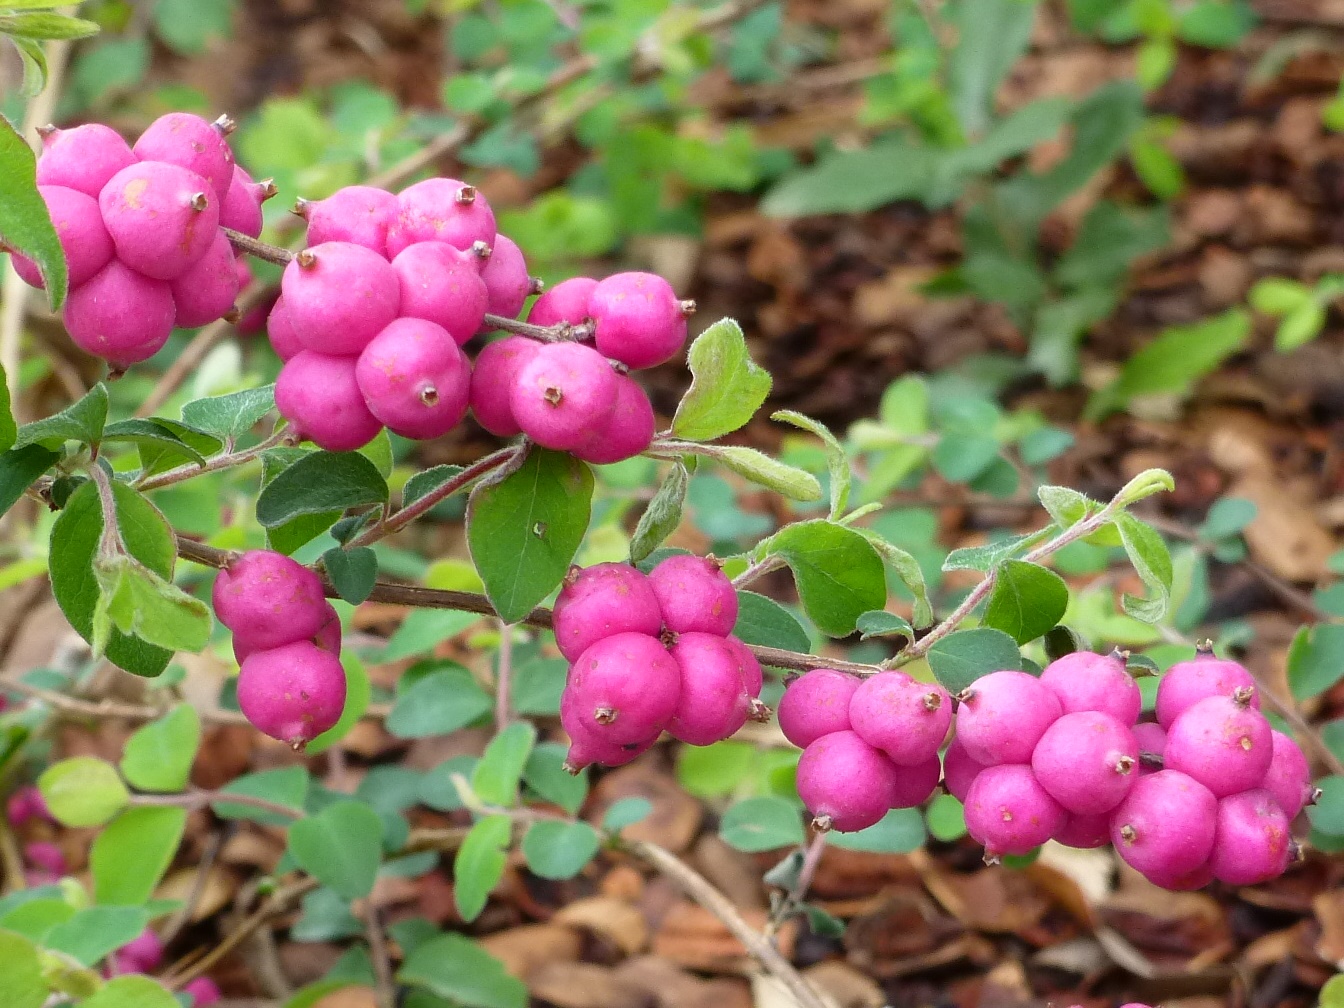 The Scientific Name is Symphoricarpos orbiculatus. You will likely hear them called Coralberry, Buckbrush, Indian Currant, Red Snowberry. This picture shows the  of Symphoricarpos orbiculatus